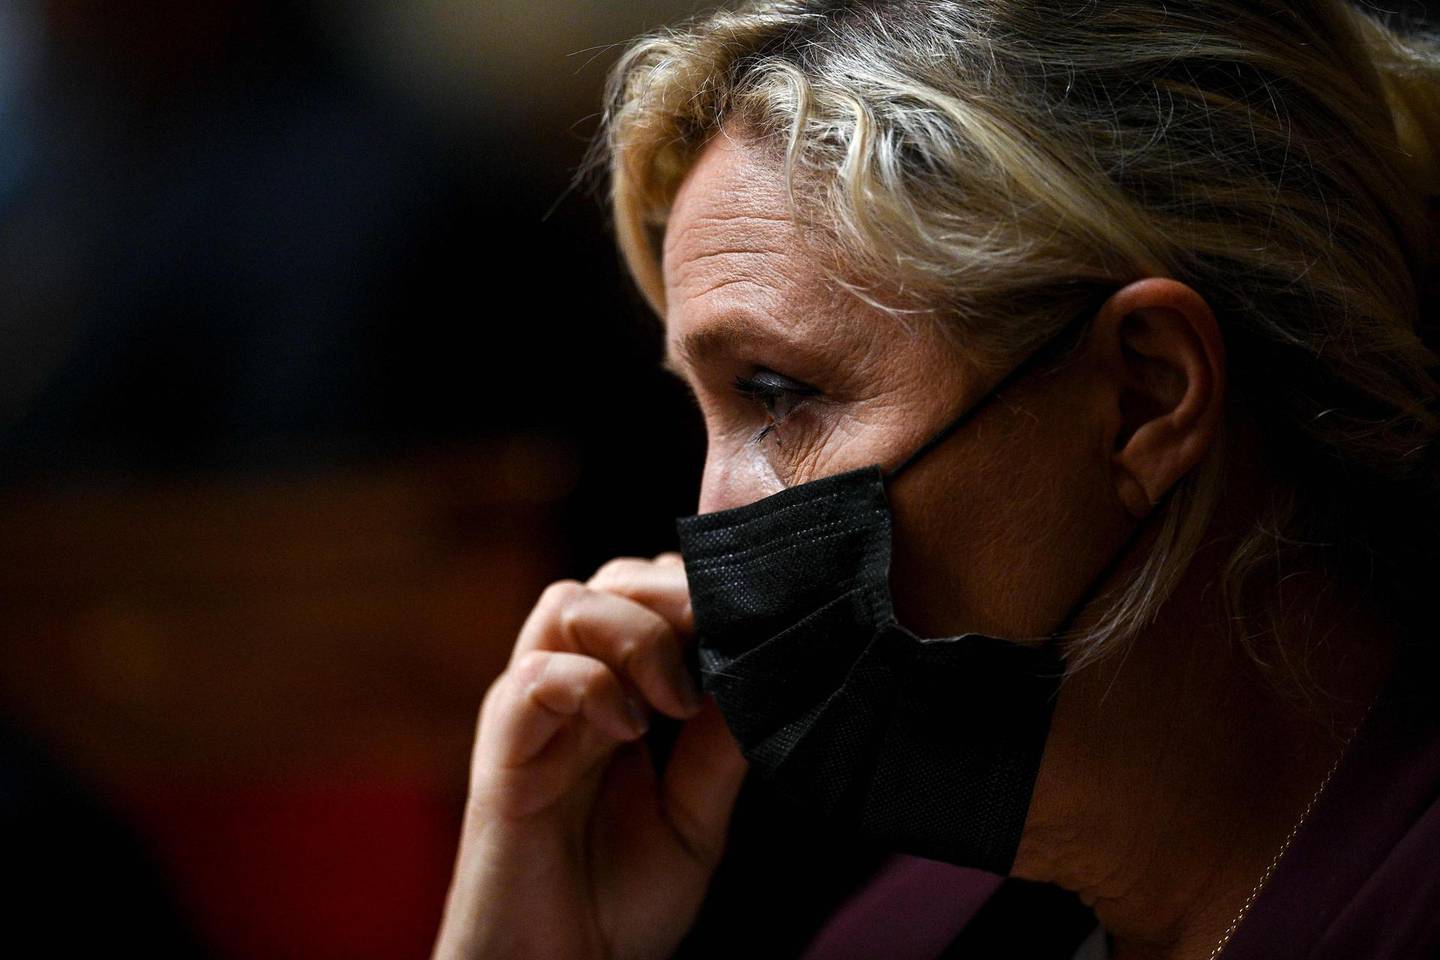 Head of far-right party Rassemblement National (RN) Marine Le Pen adjusts her protective face mask during a session of questions to the government at the National Assembly in Paris on October 20, 2020. / AFP / Christophe ARCHAMBAULT
